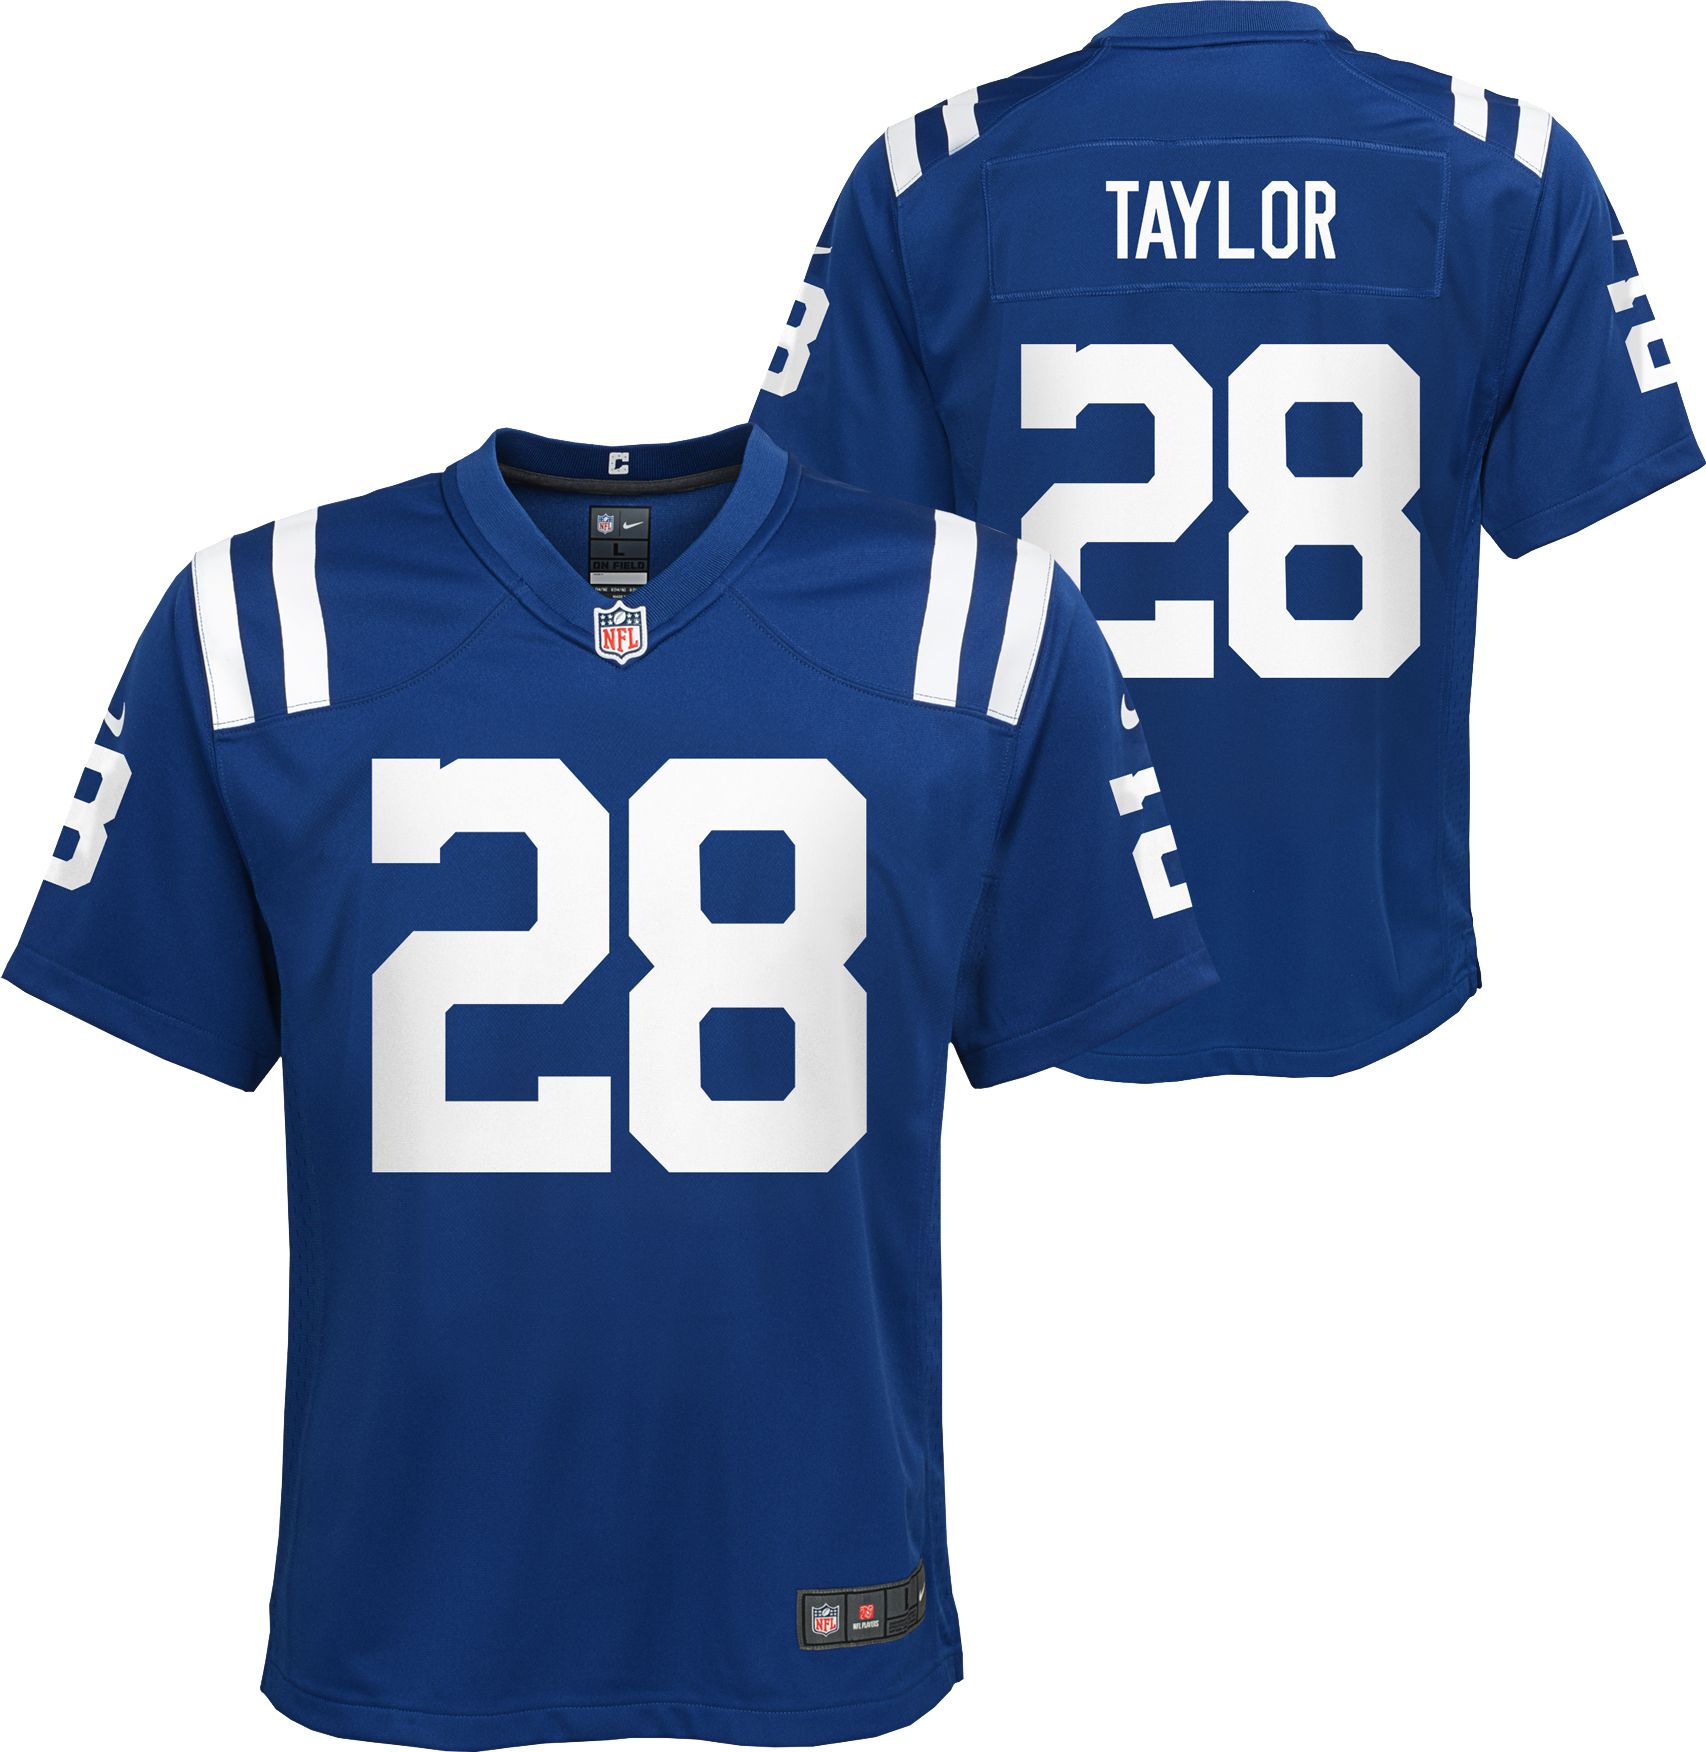 Official Colts jersey